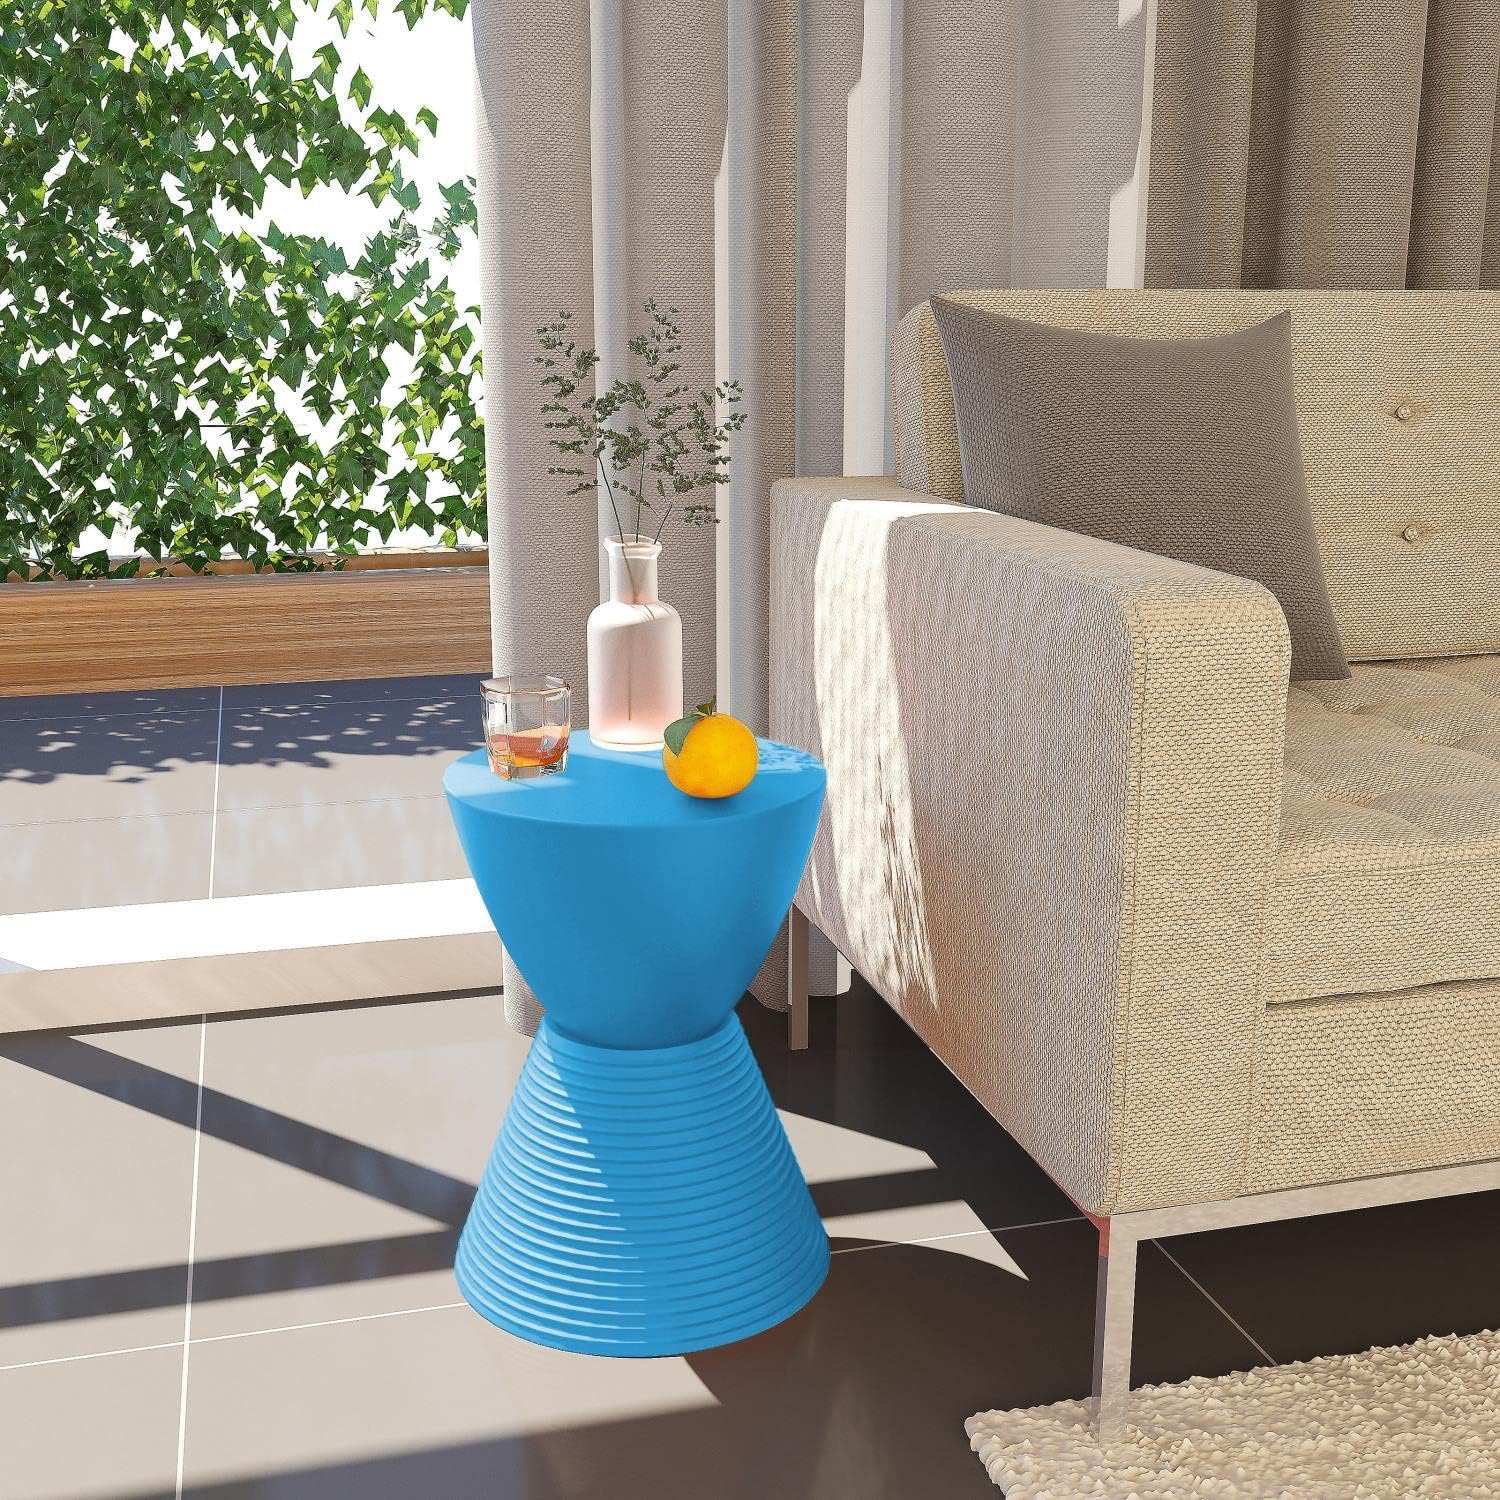 LeisureMod Boyd Modern Accent Side Table End Table Indoor and Outdoor Use, 16.75" H x 11.75" W x 11.75" D (Blue)